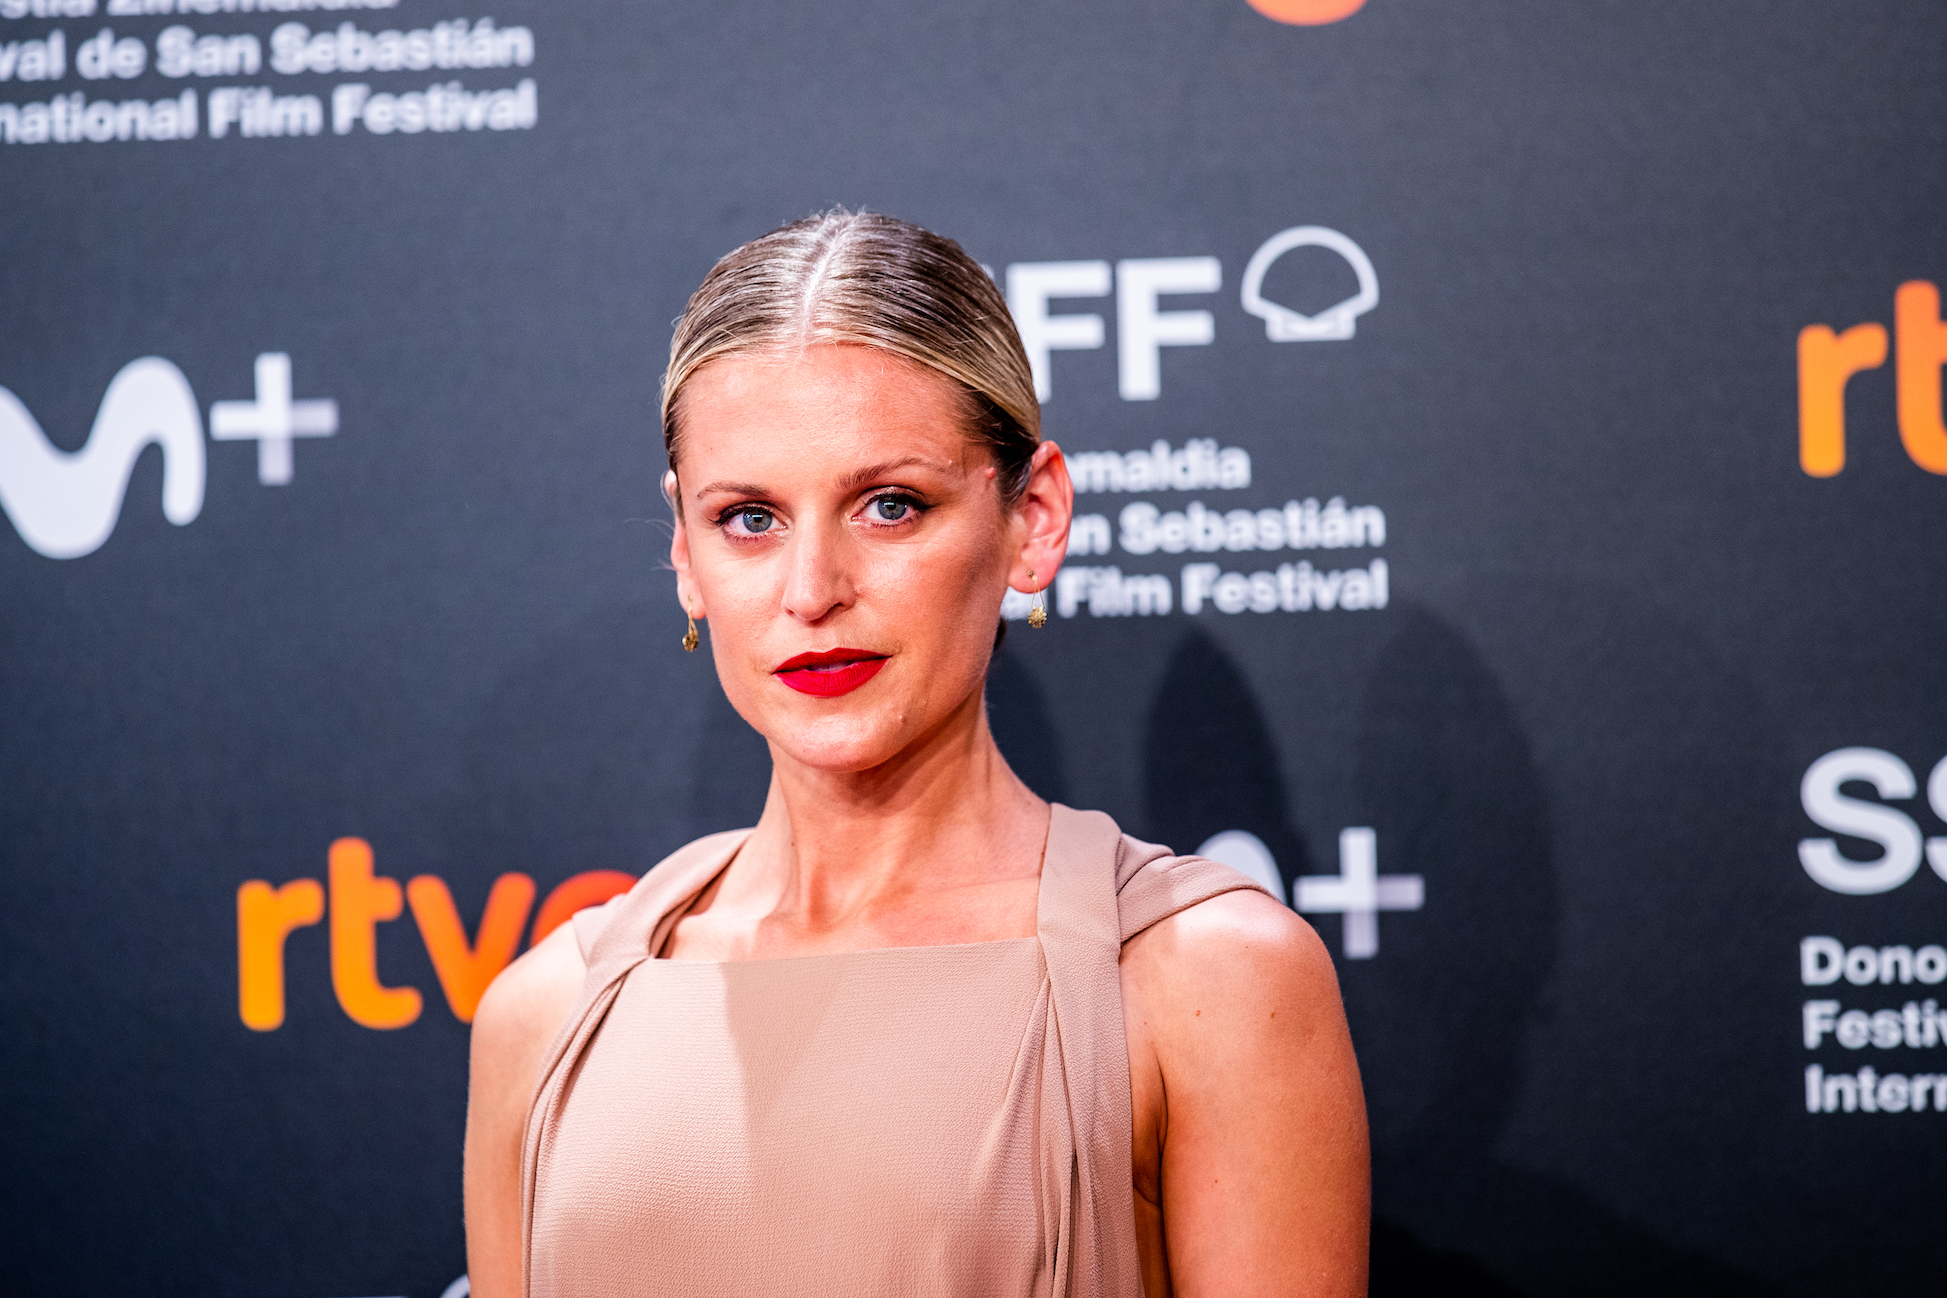 Andor actress Denise Gough attends The Other Lamb premiere at the 67th San Sebastian Film Festival